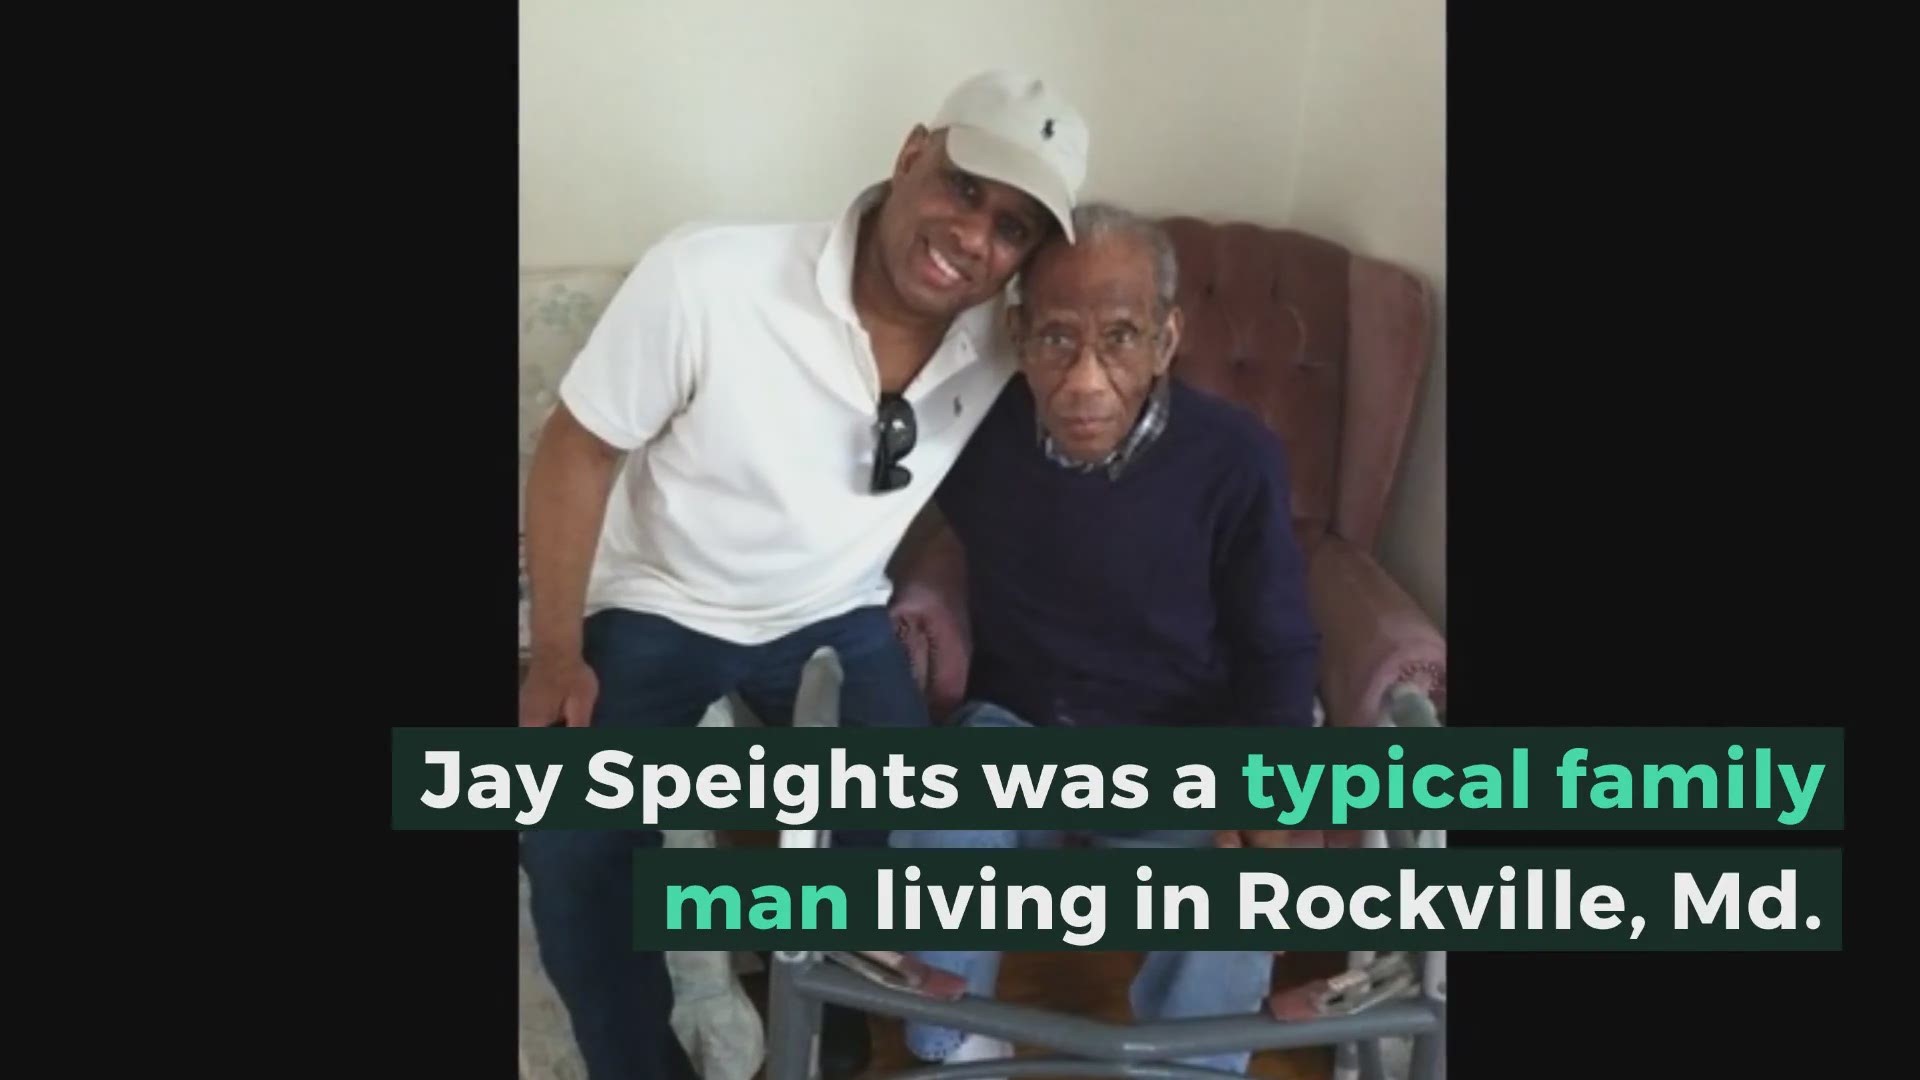 Jay Speights was a typical family man in suburban Maryland. Then, a DNA test changed everything – and revealed he’s an African prince.